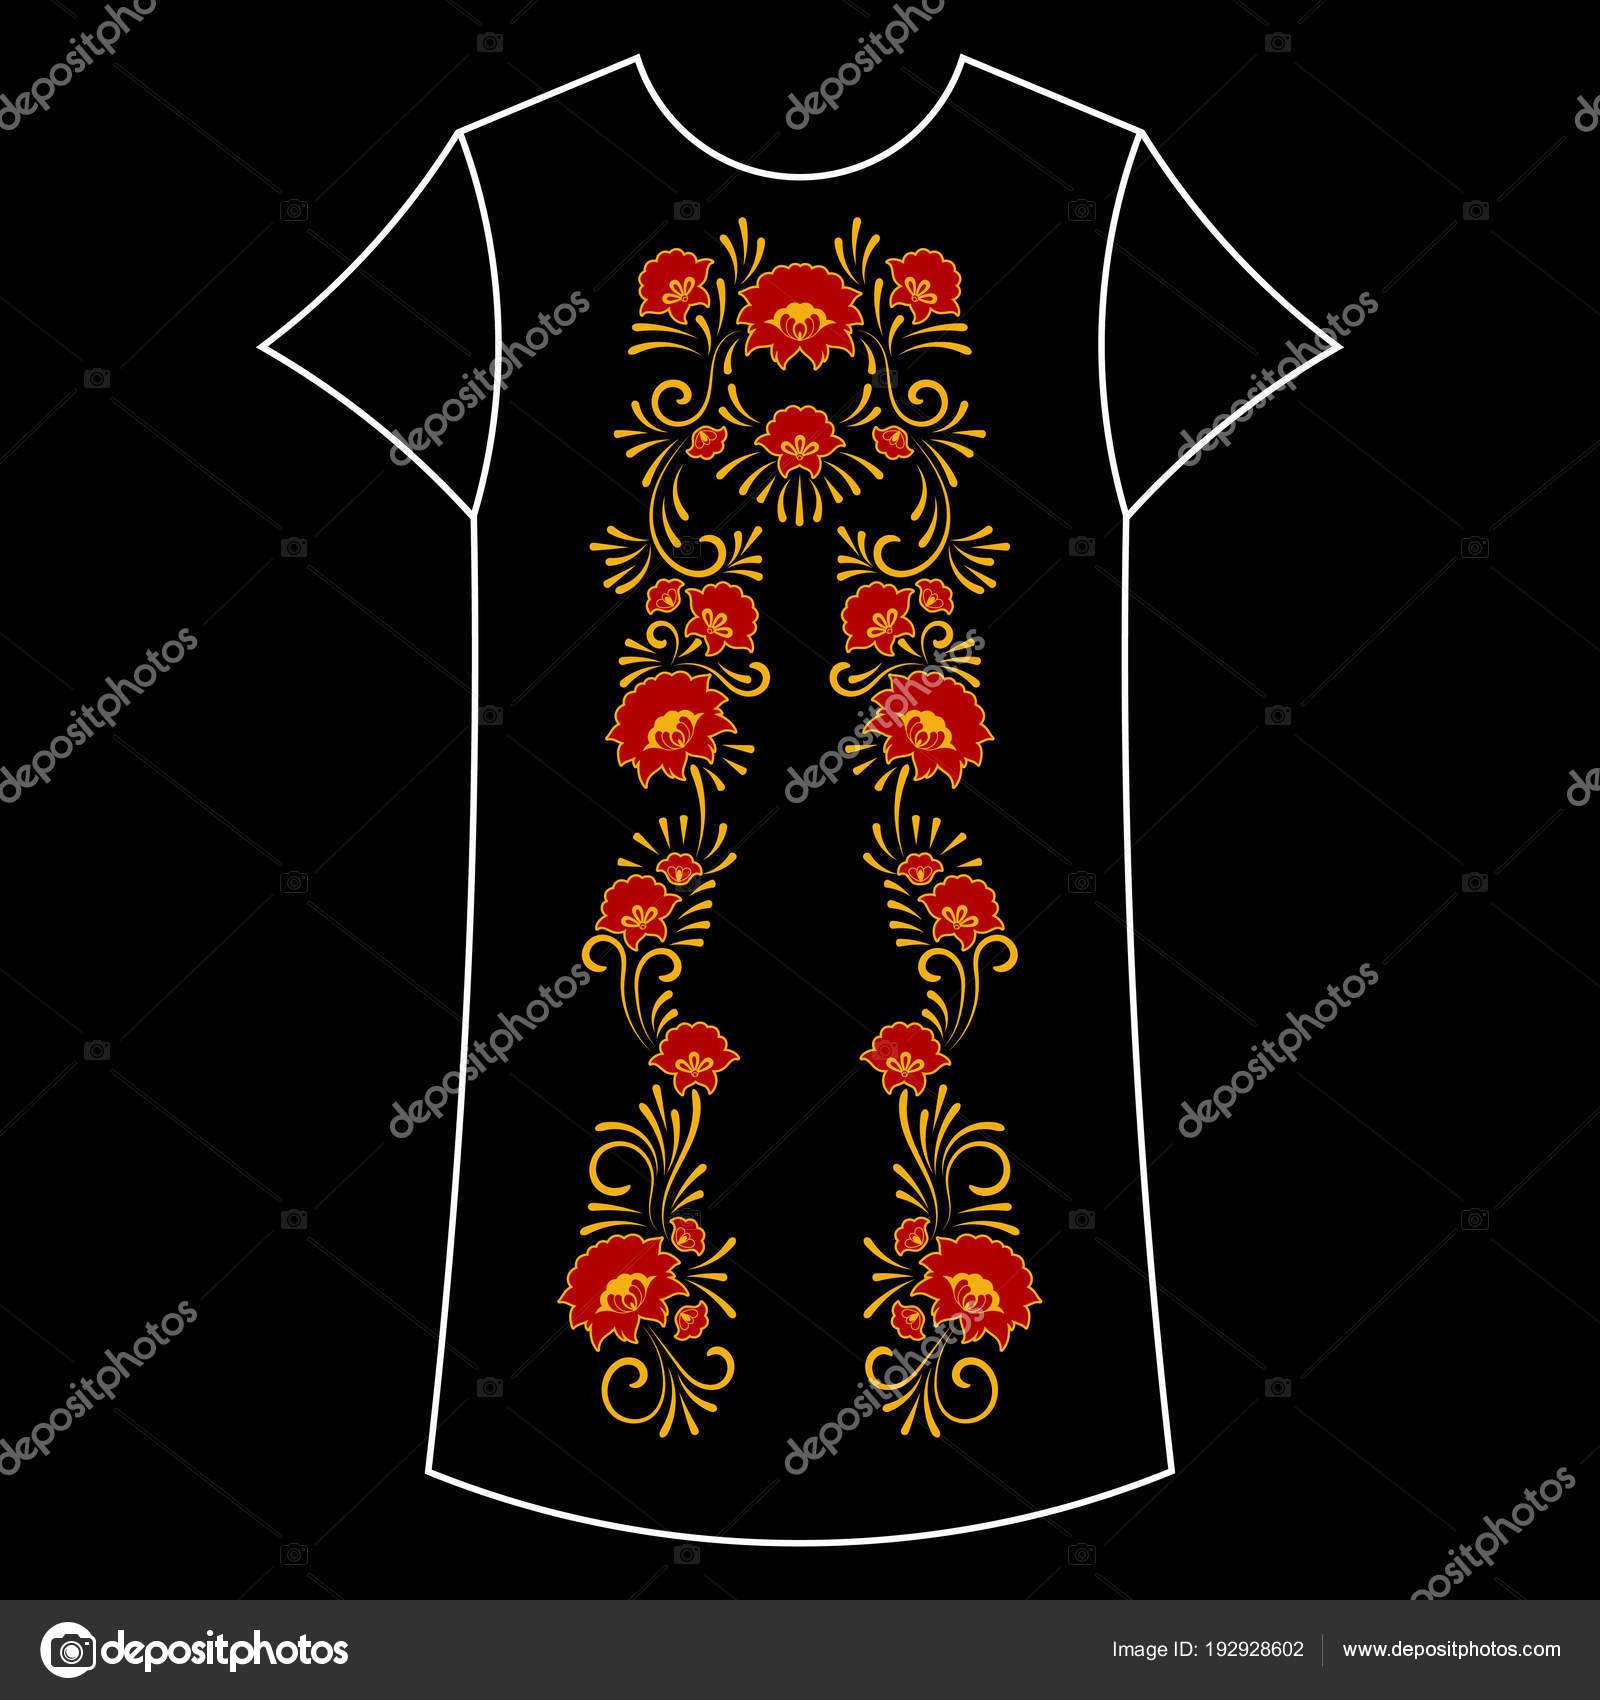 Embroidery Dress Patterns Neck Flower Embroidery Pattern Vector Traditional Folk Craft Floral